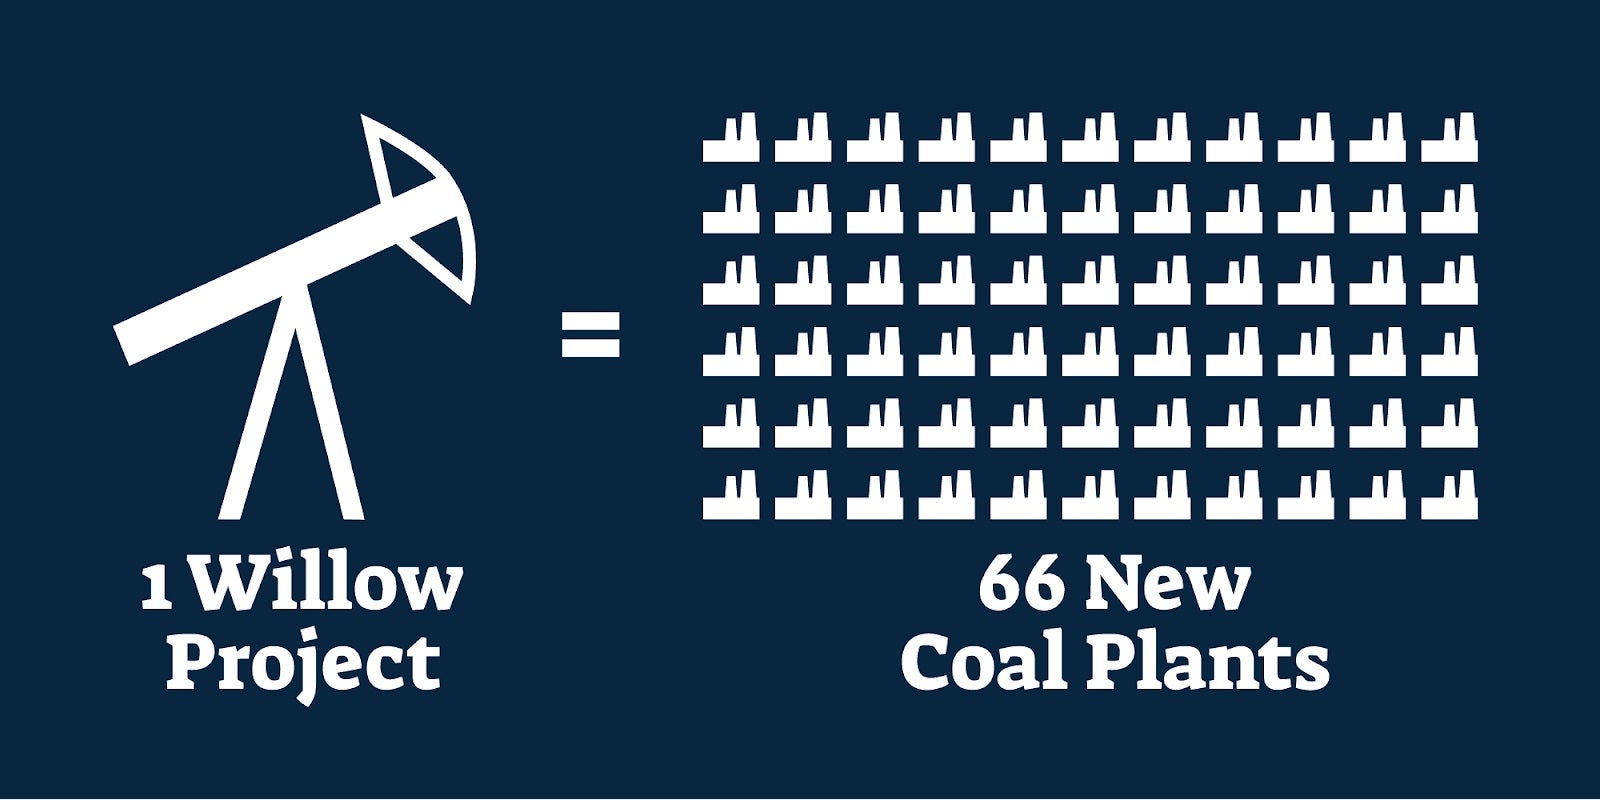 The Willow project would equal the annual emissions of 66 coal plants.